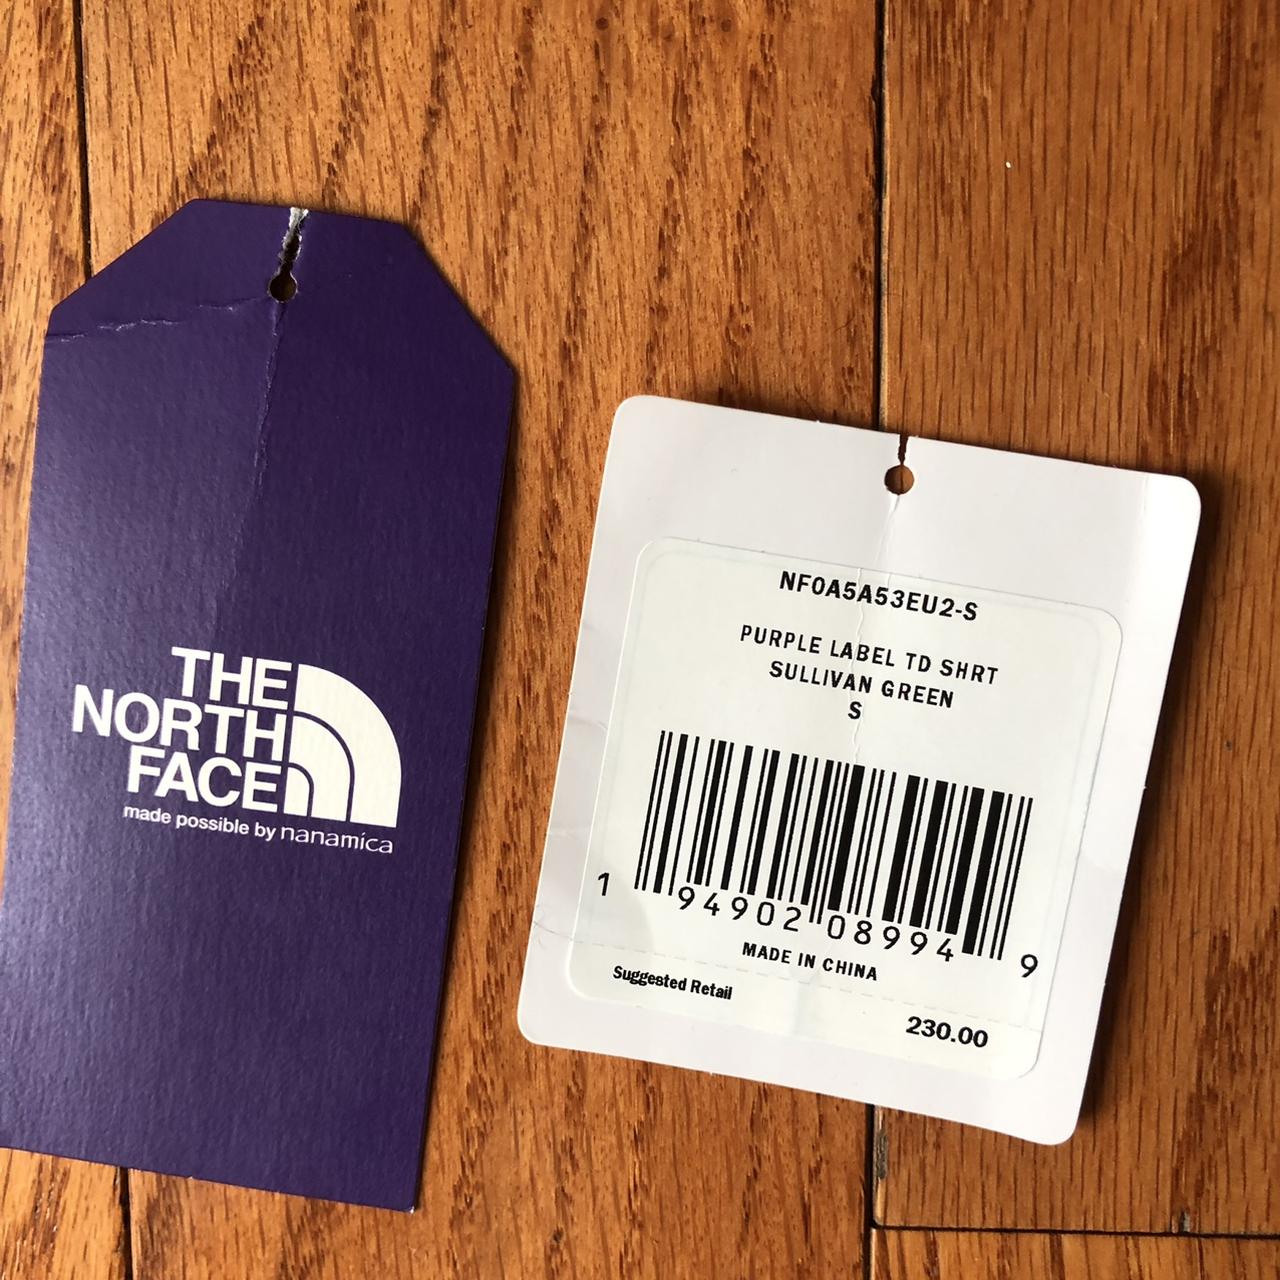 Product Image 4 - The north face purple label